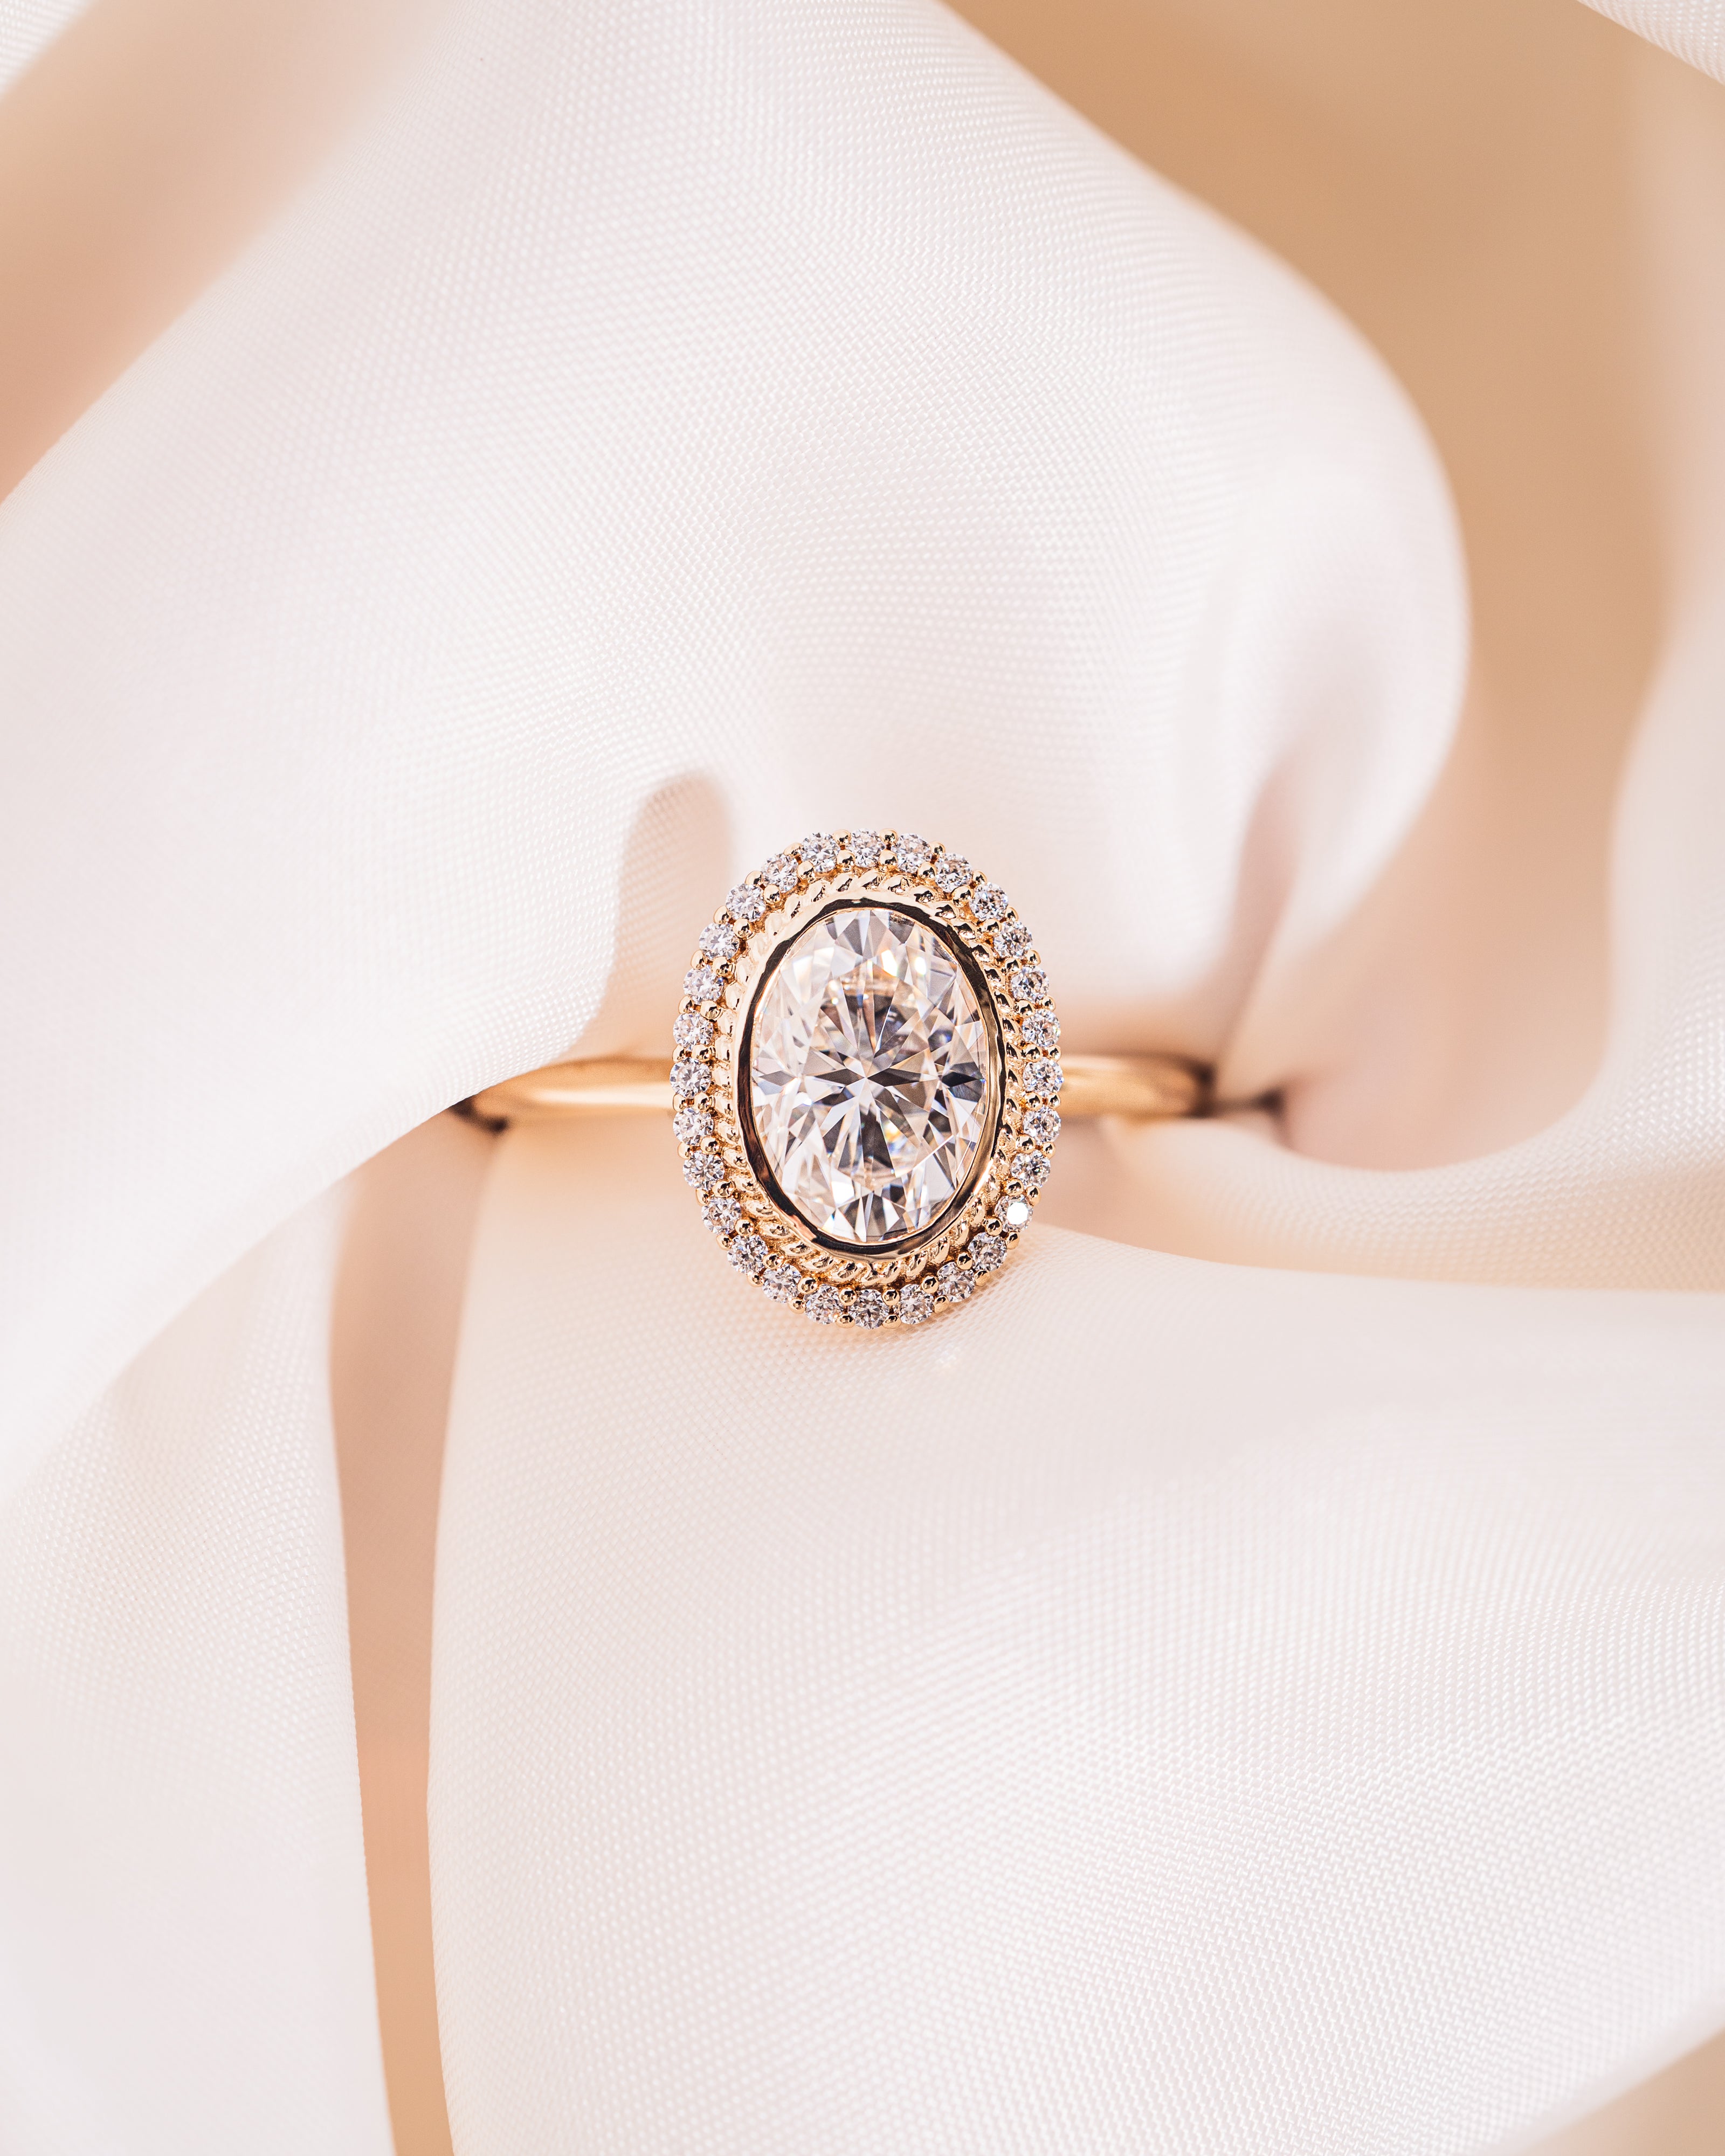 How did you decide on a Zen Moissanite piece?